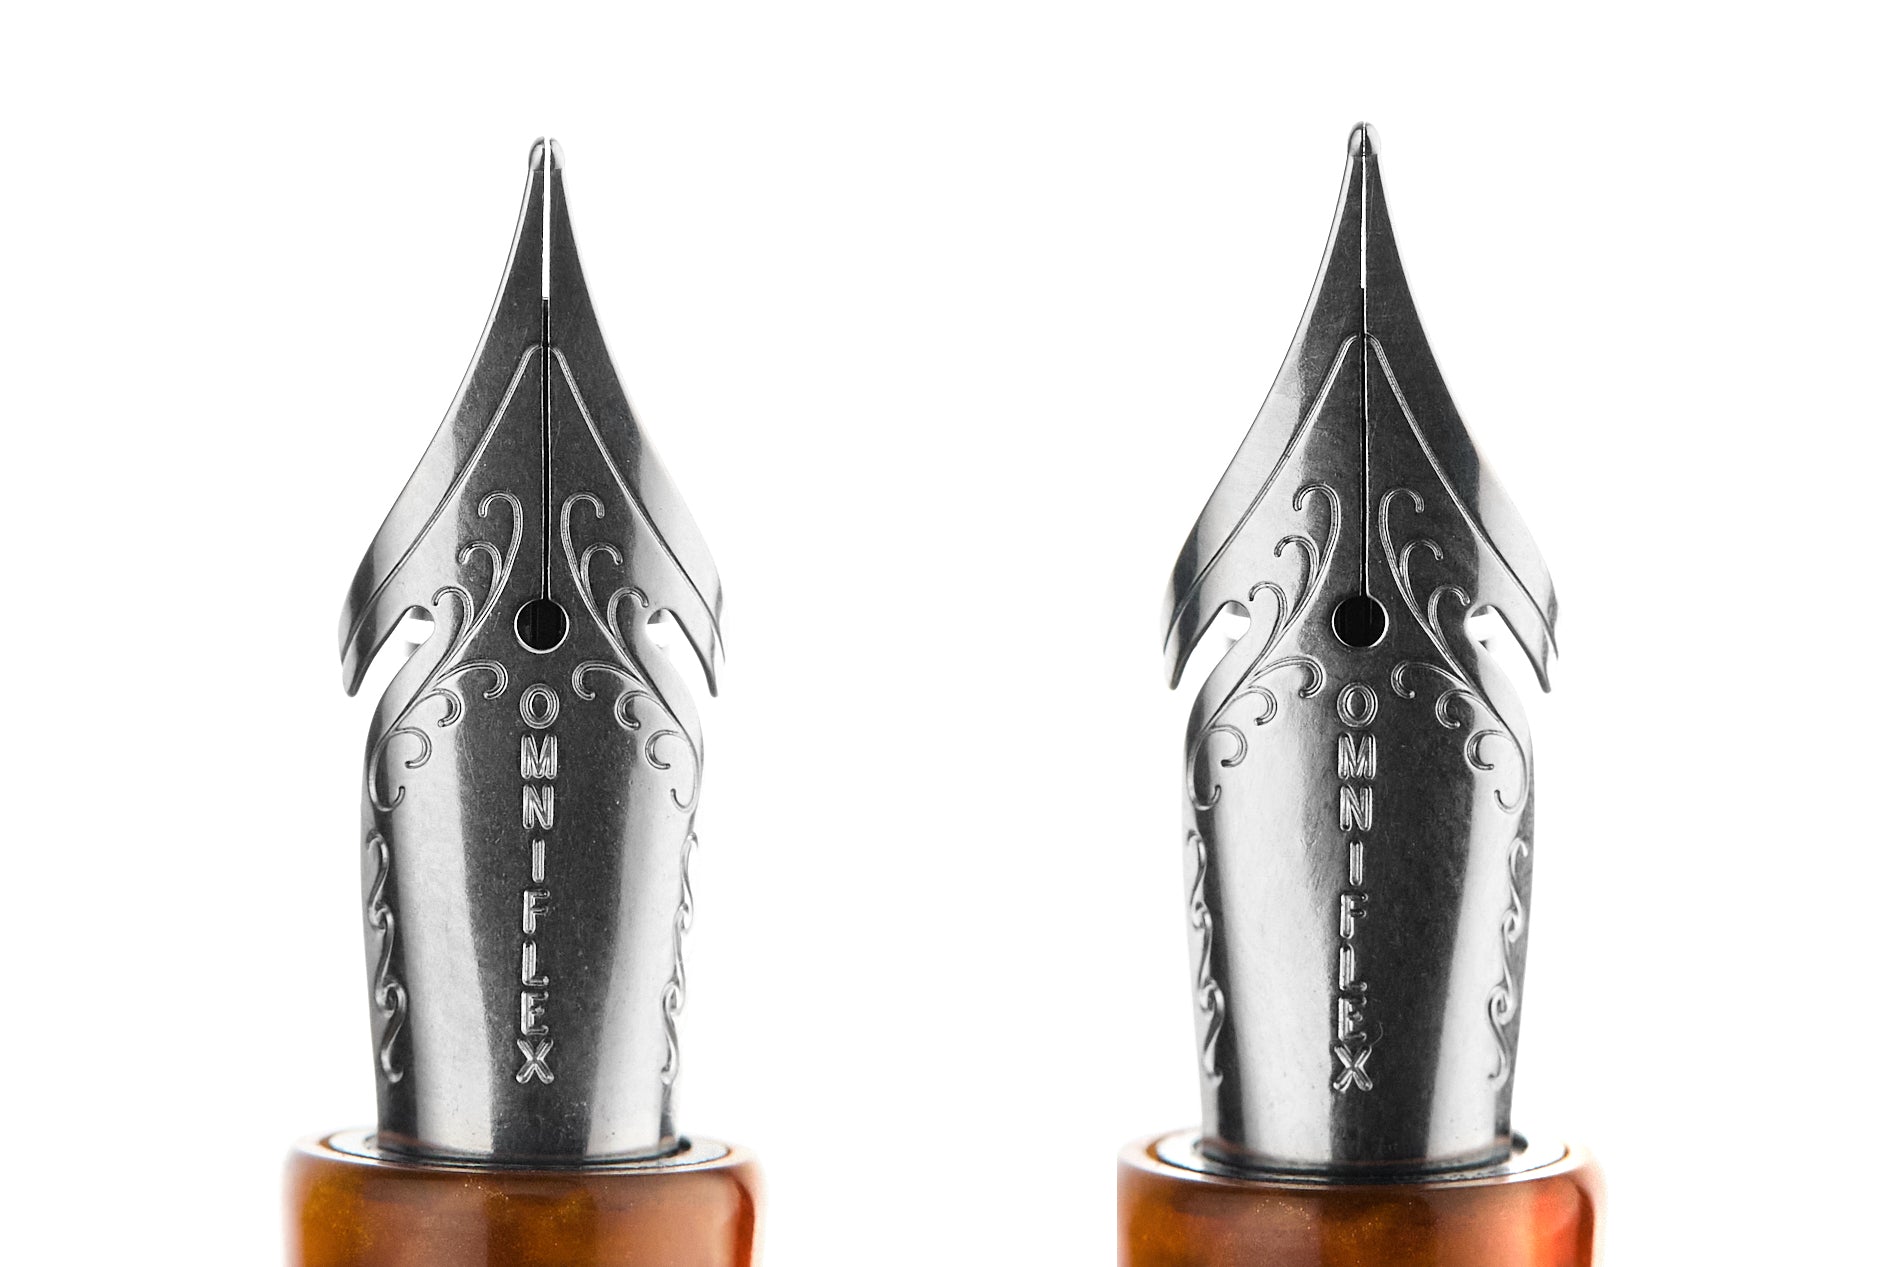 Two nibs side by side, one with a larger space between the tines